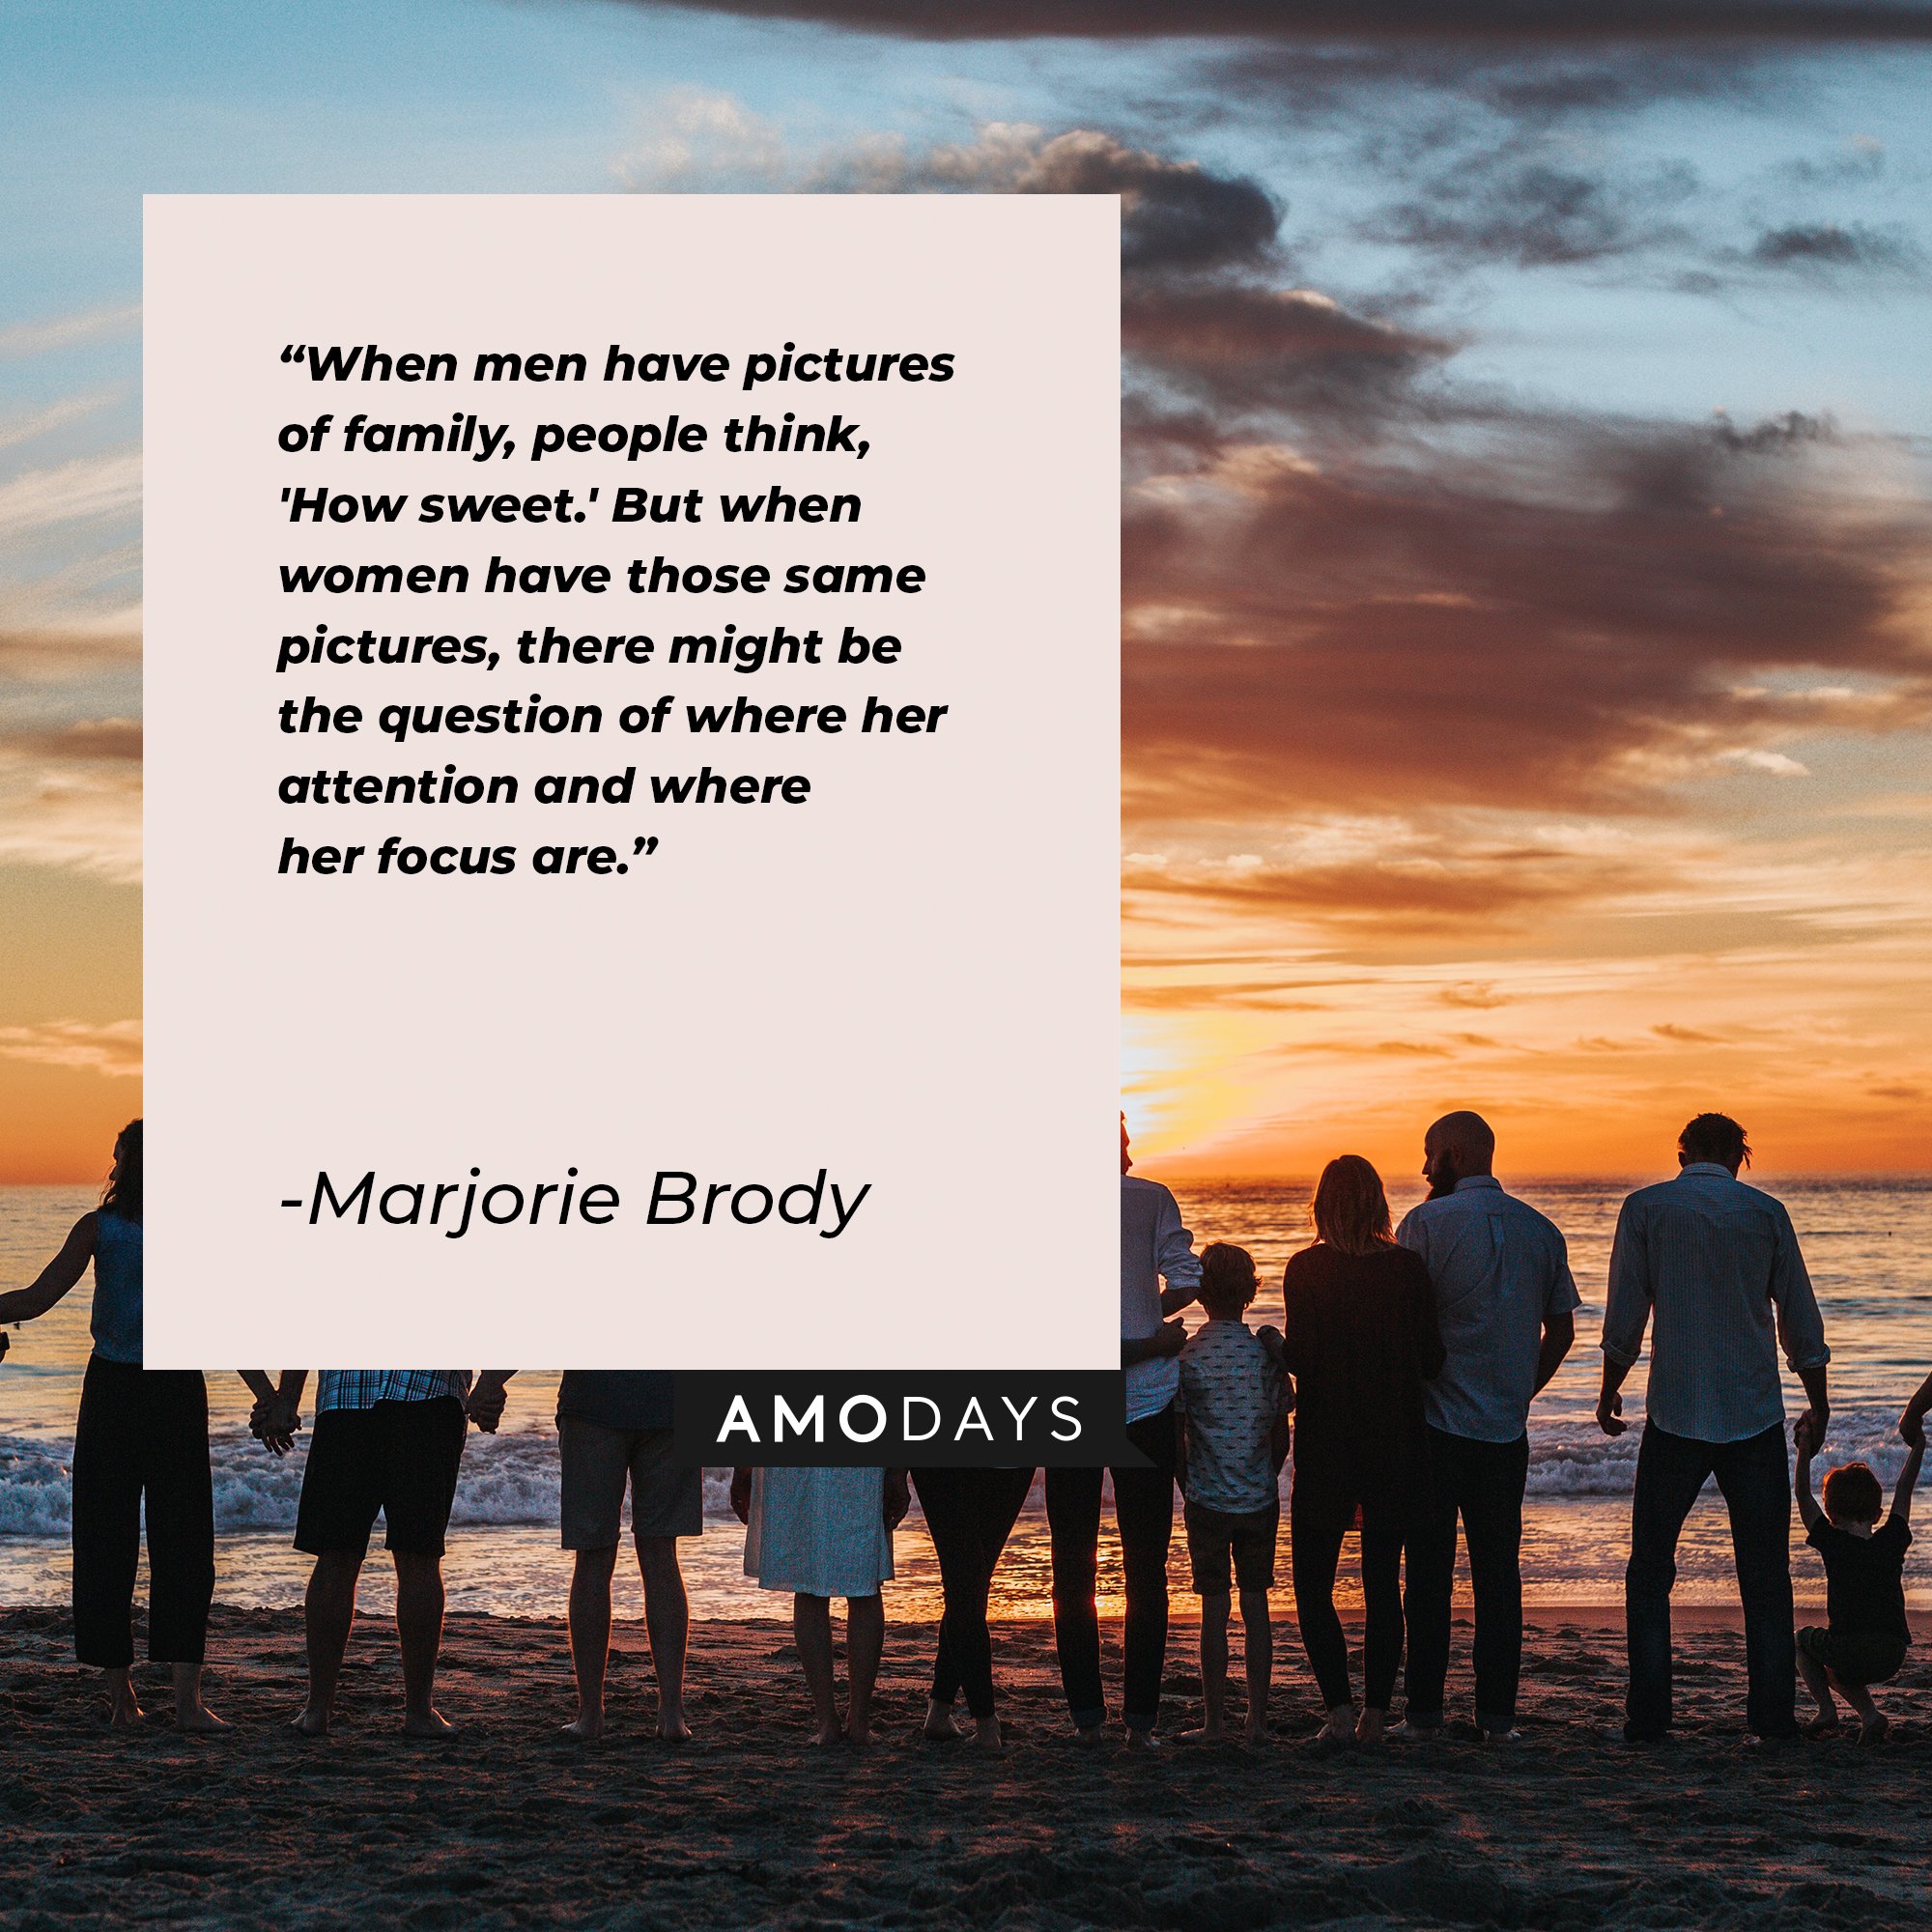 Marjorie Brody’s quote: "When men have pictures of family, people think, 'How sweet.' But when women have those same pictures, there might be the question of where her attention and where her focus are." | Image: AmoDays